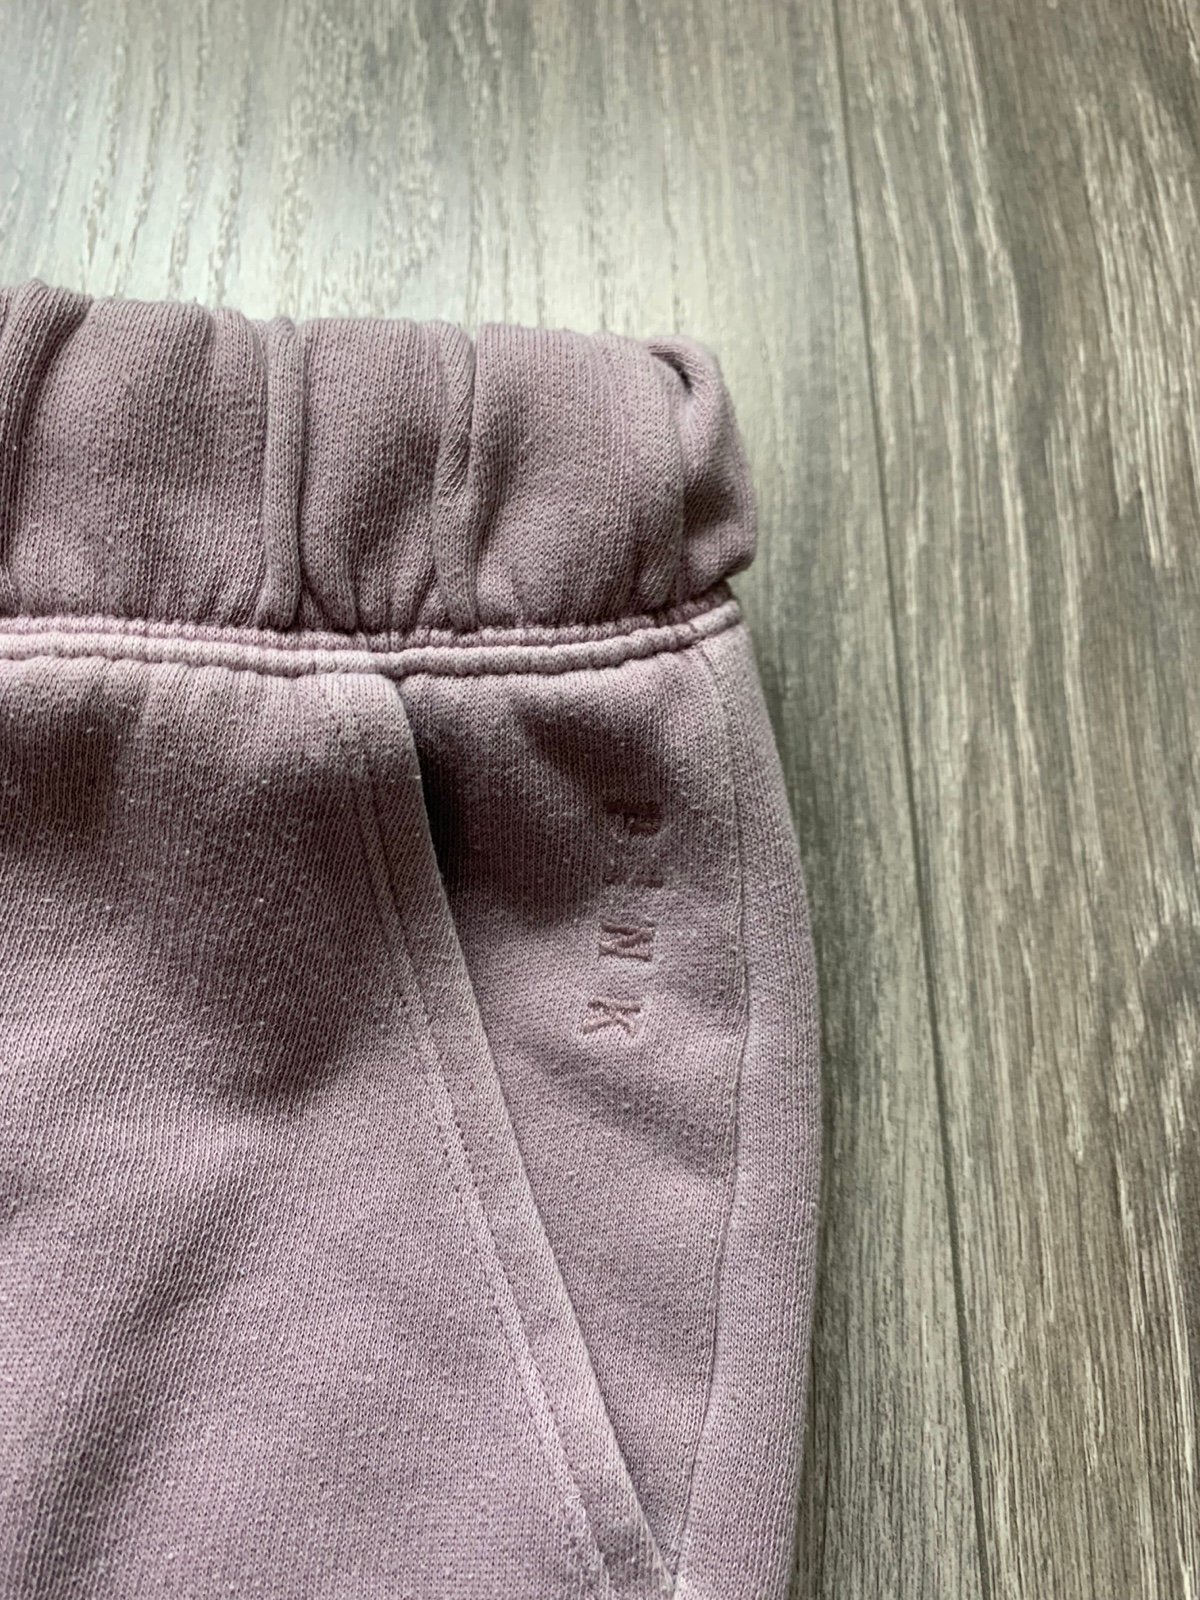 high discount PINK Victoria’s Secret Women’s Sweatpants Joggers  size XS lyWtgLr4v all for you